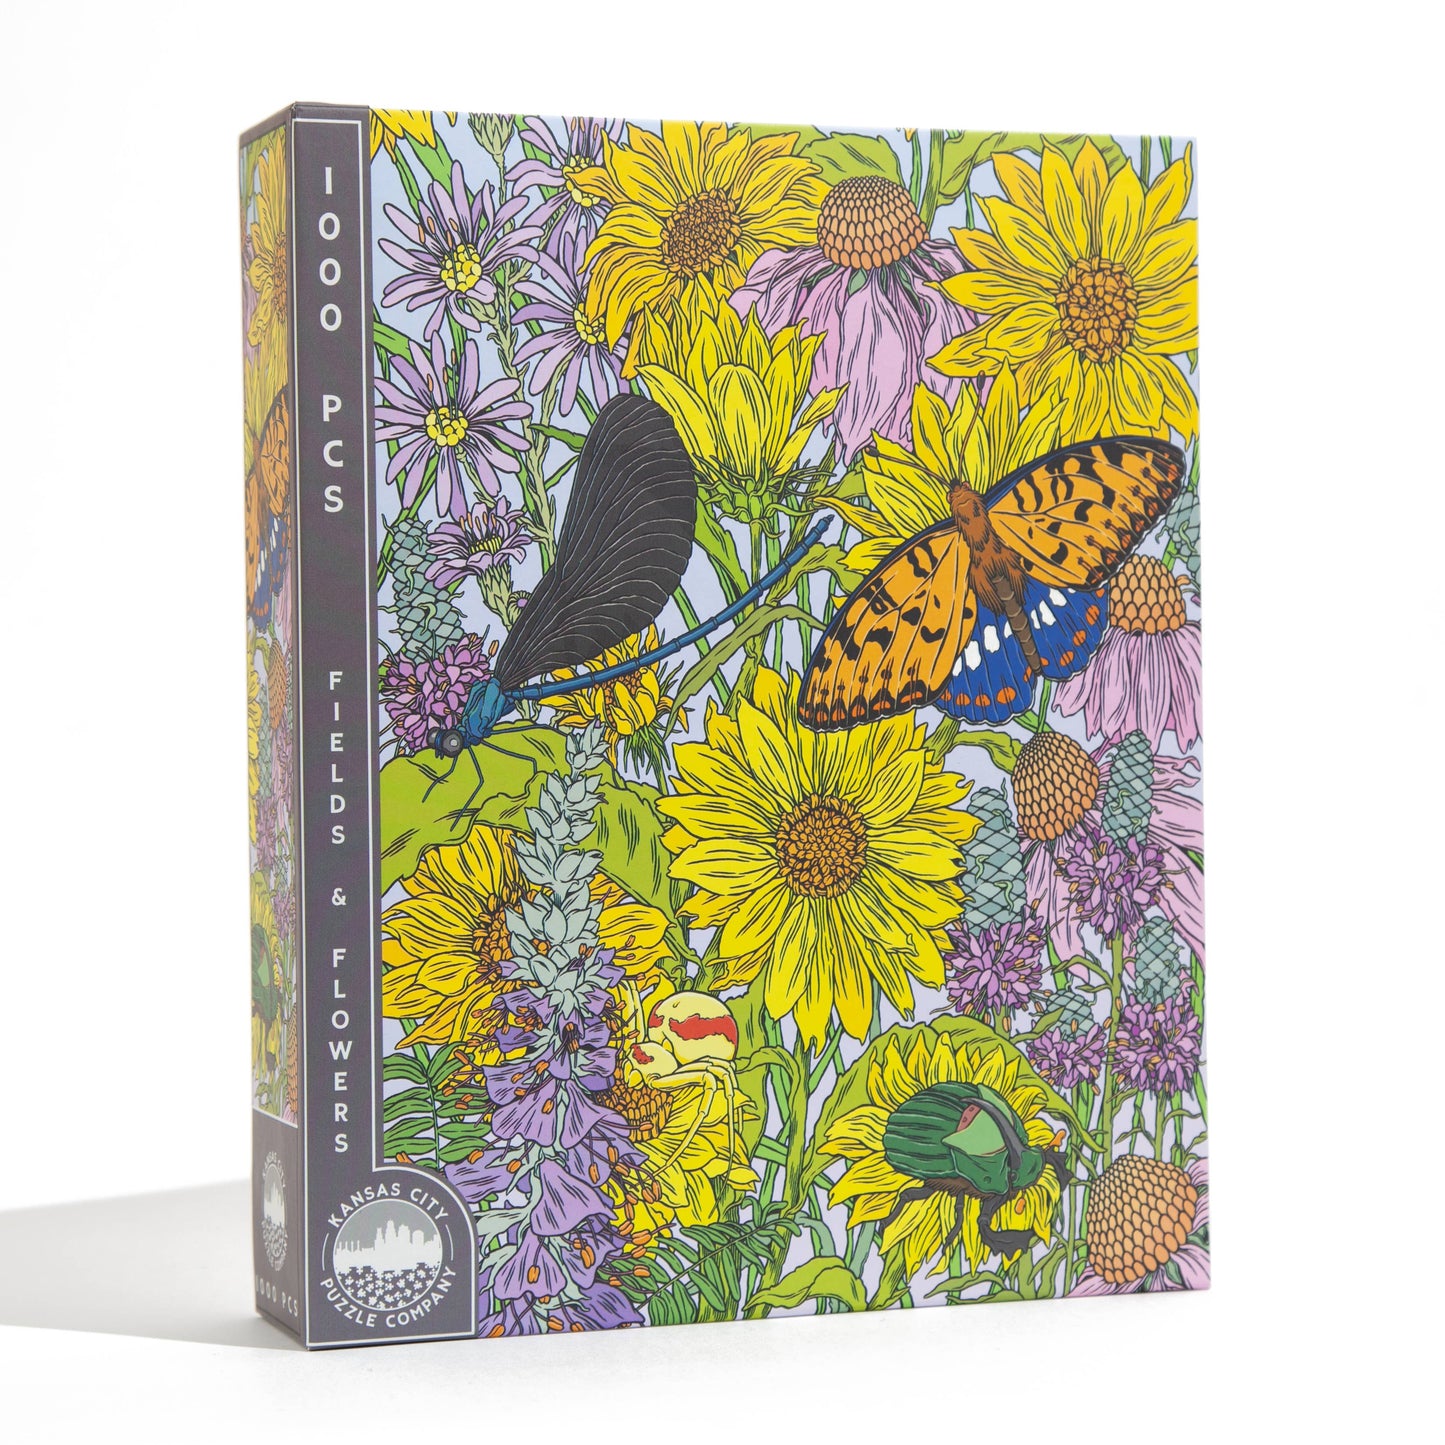 Kansas City Puzzle Company - Fields & Flowers Puzzle by Cooper Malin